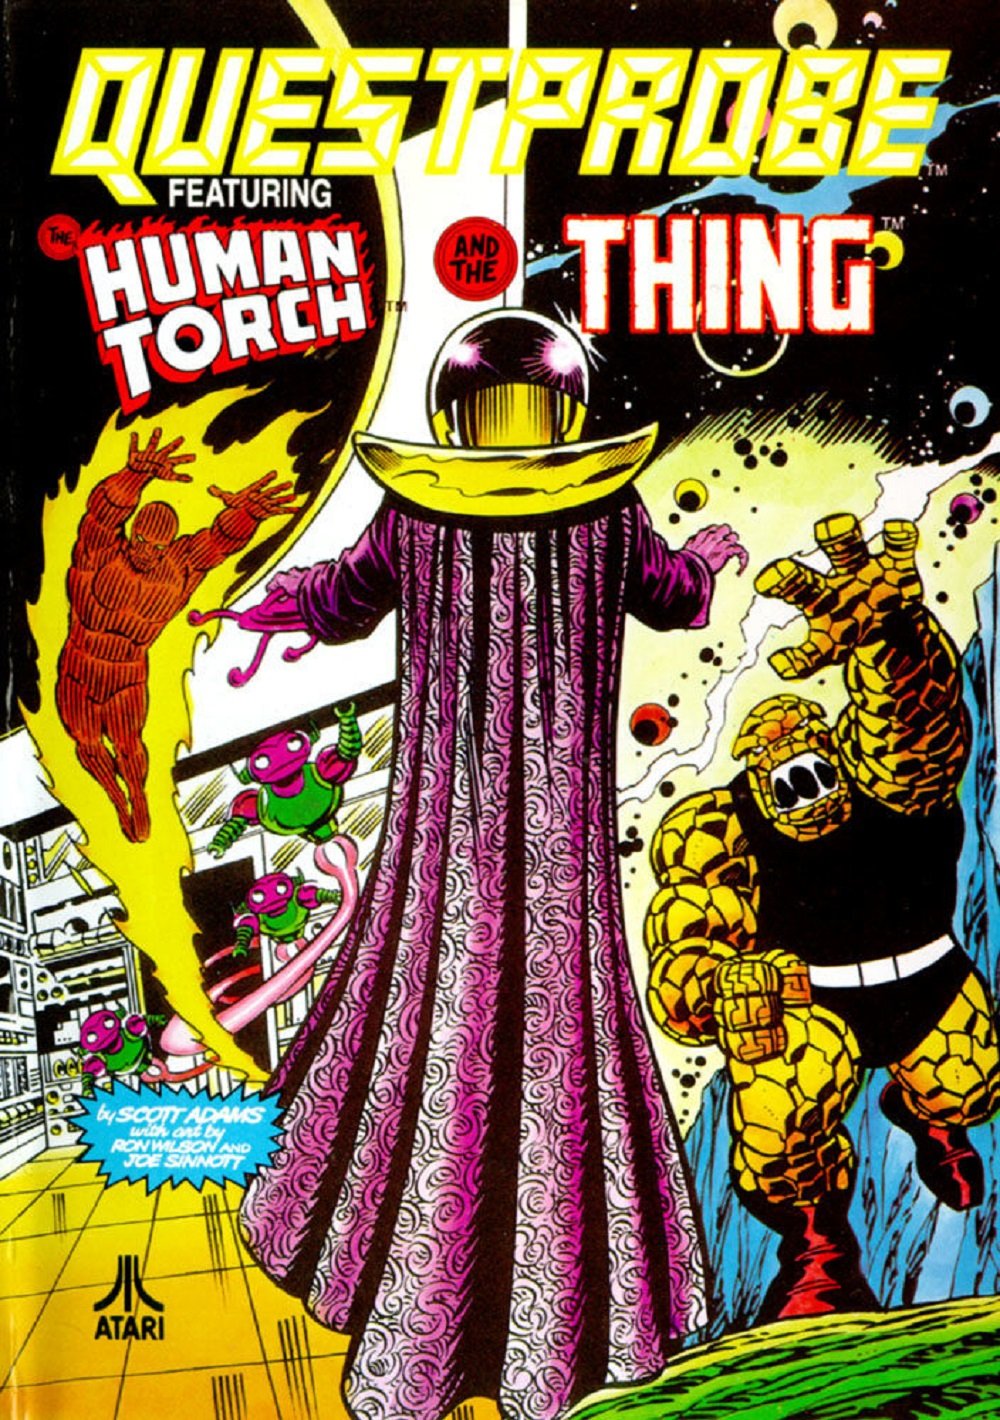 Image of Questprobe featuring Human Torch and the Thing